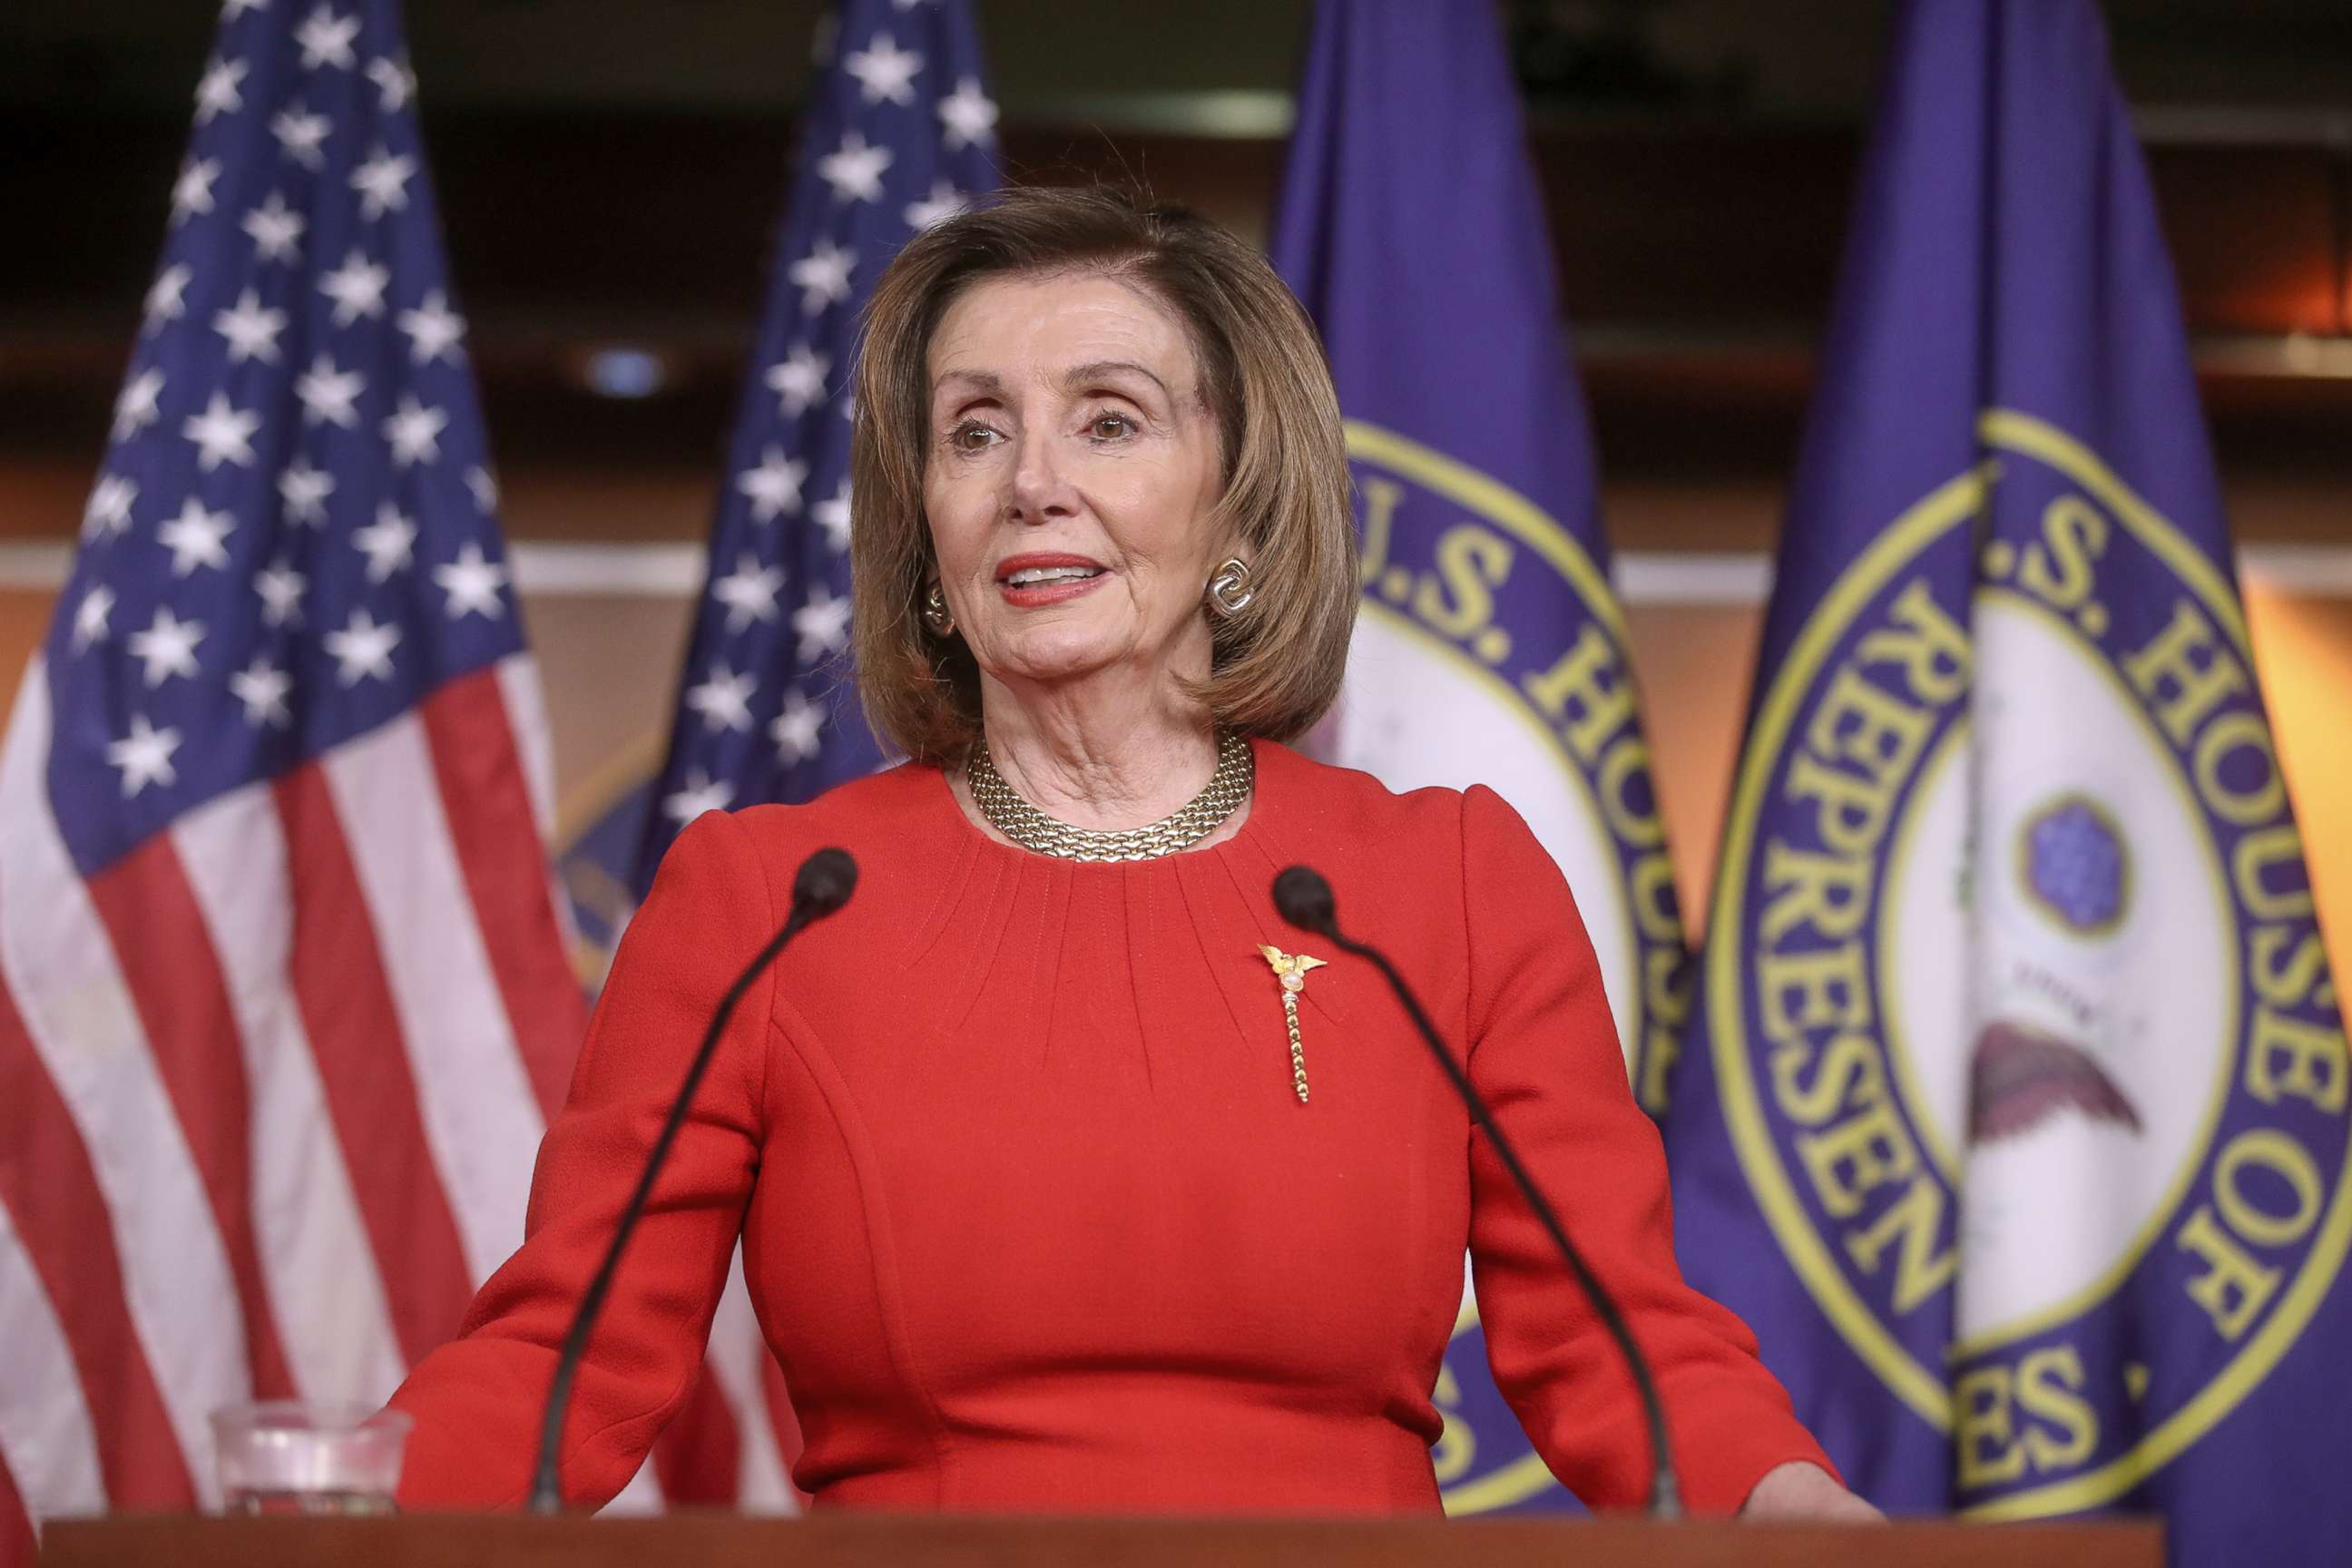 PHOTO: Speaker of the House Nancy Pelosi speaks about the impeachment of U.S. President Donald Trump during her weekly news conference with Capitol Hill reporters at the U.S. Capitol in Washington, D.C., Dec. 19, 2019.